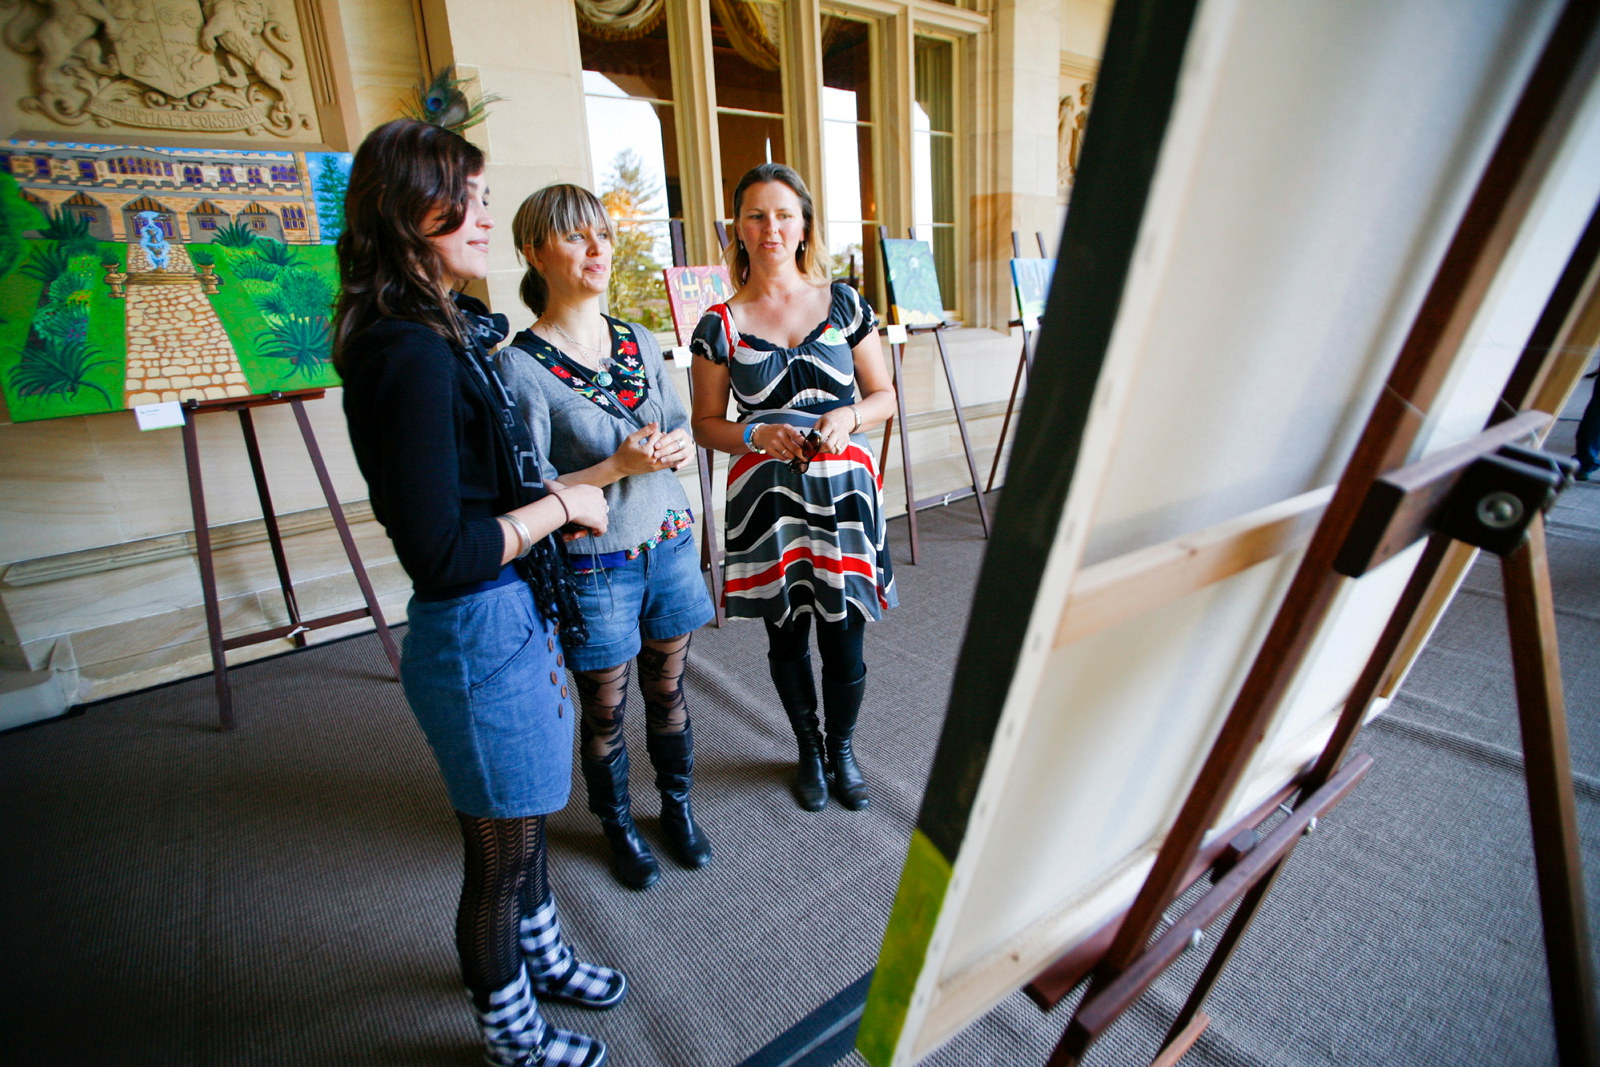 Studio ARTES paintings displayed on terrace of Government House during Garden Music